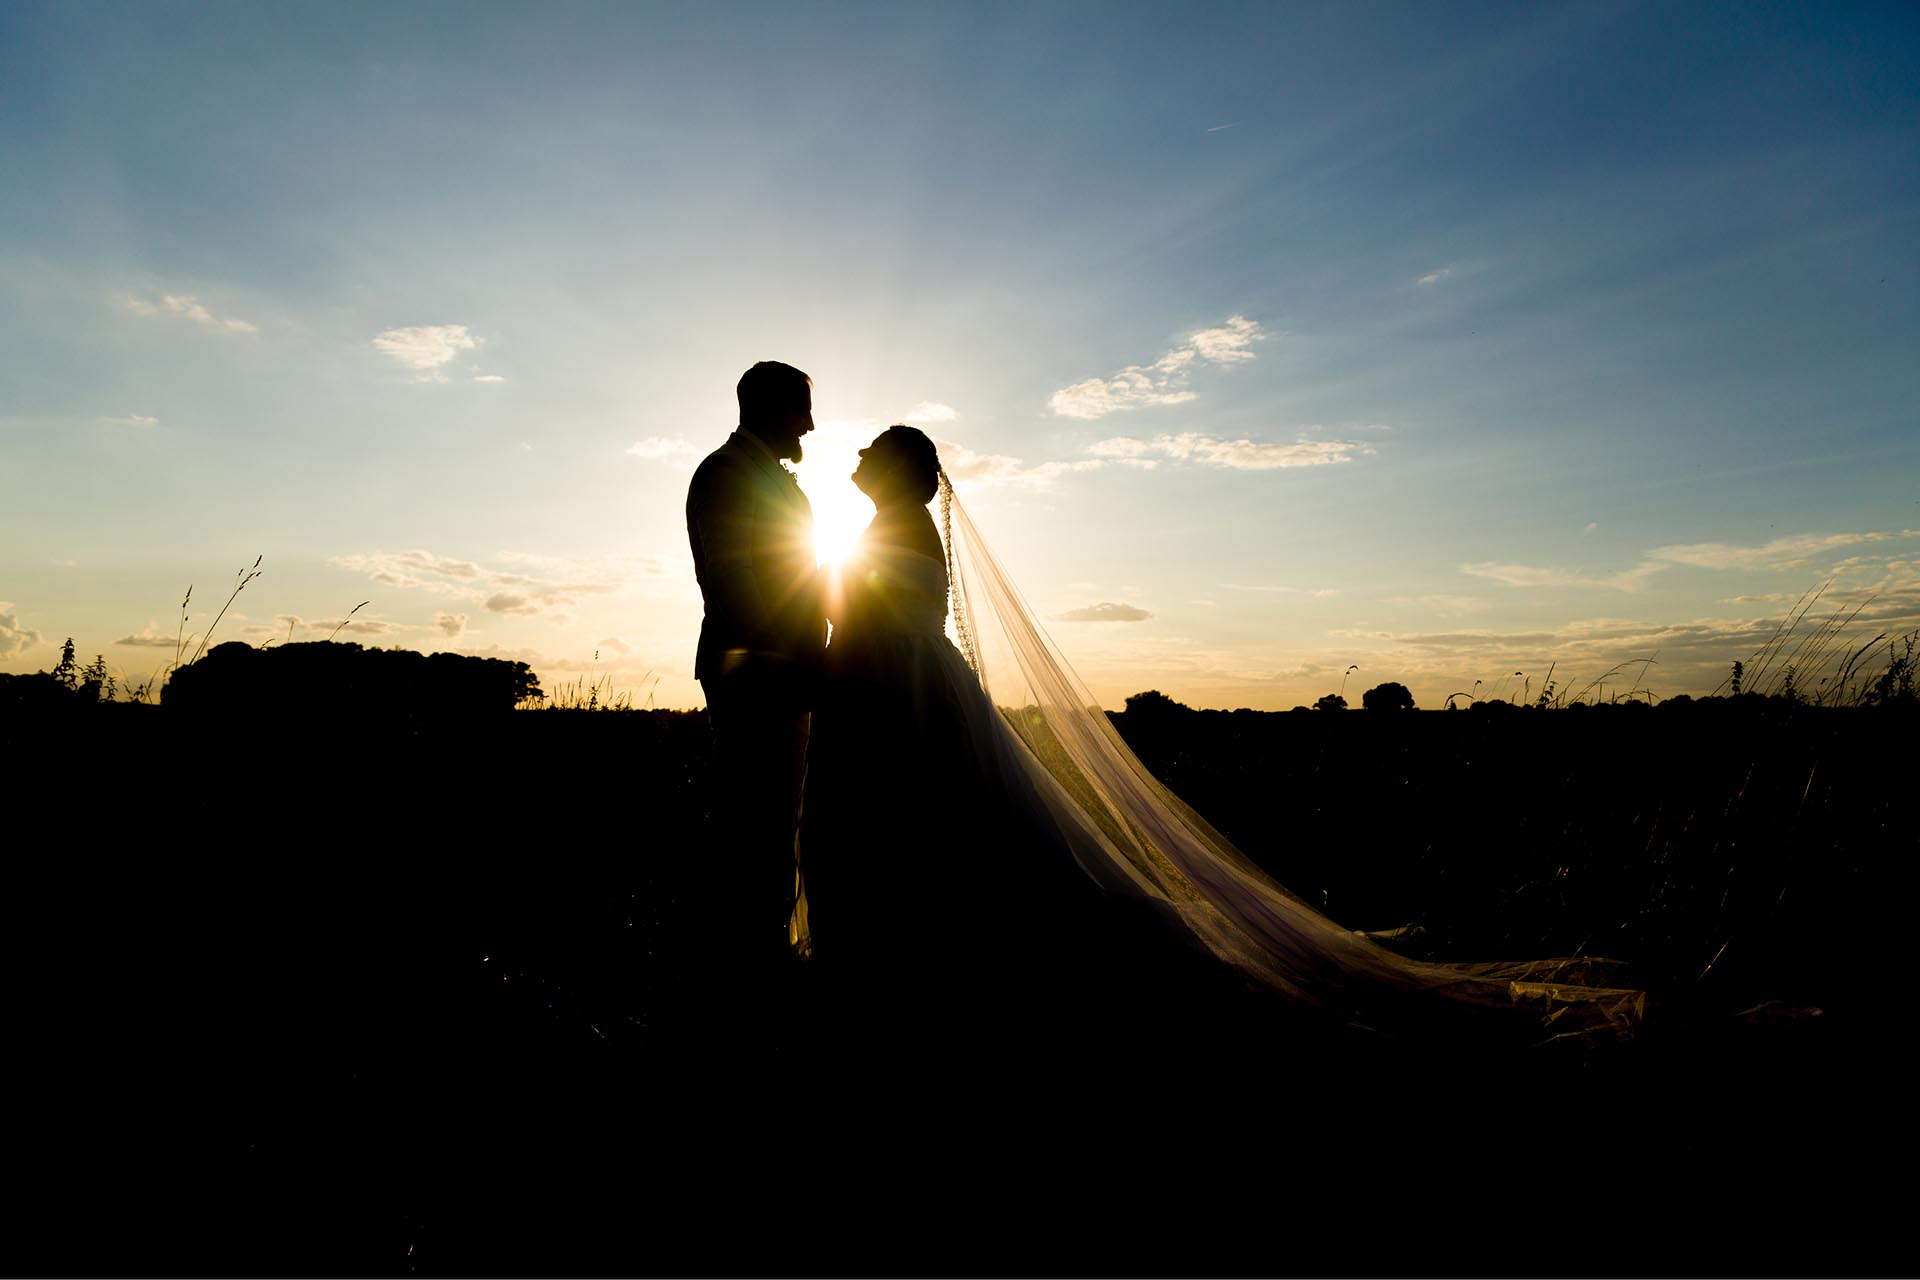 A Pattiswick sunset by Essex wedding photographer at The Compasses at Pattiswick